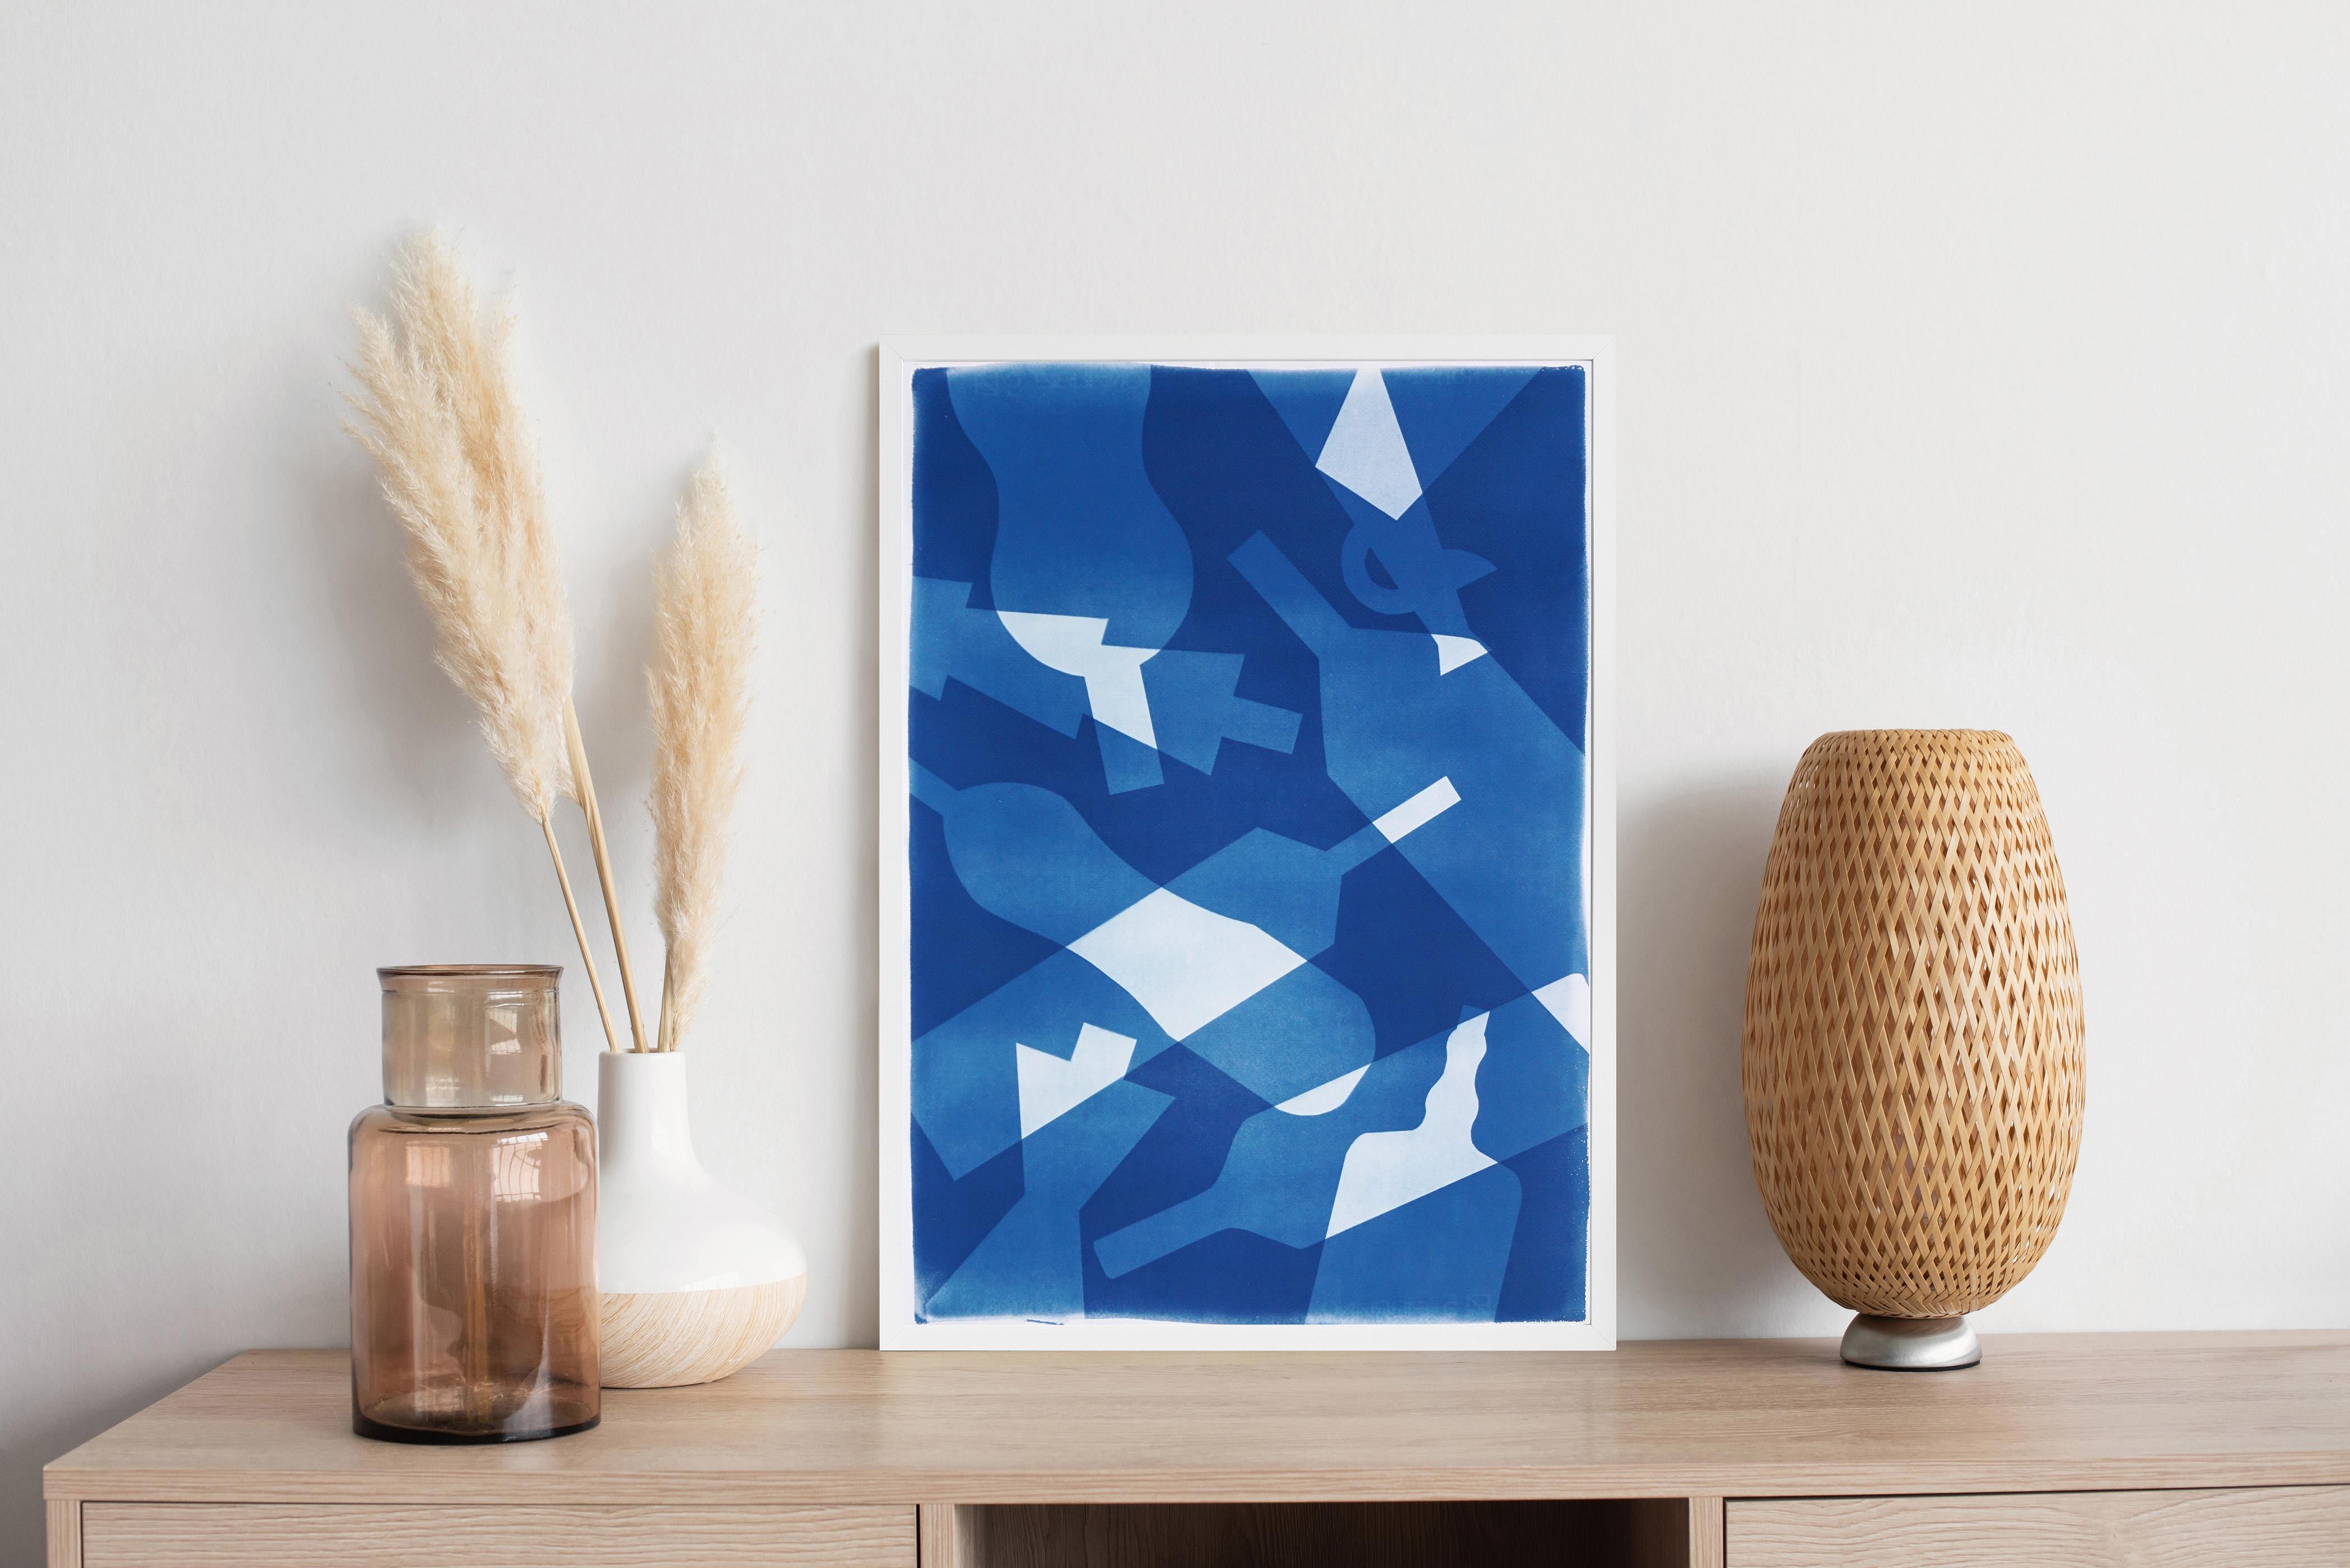 Falling Bottles, Still Life in Blue Tones, Patterns and Layers, Unique Cyanotype - Painting by Gio Bellagio